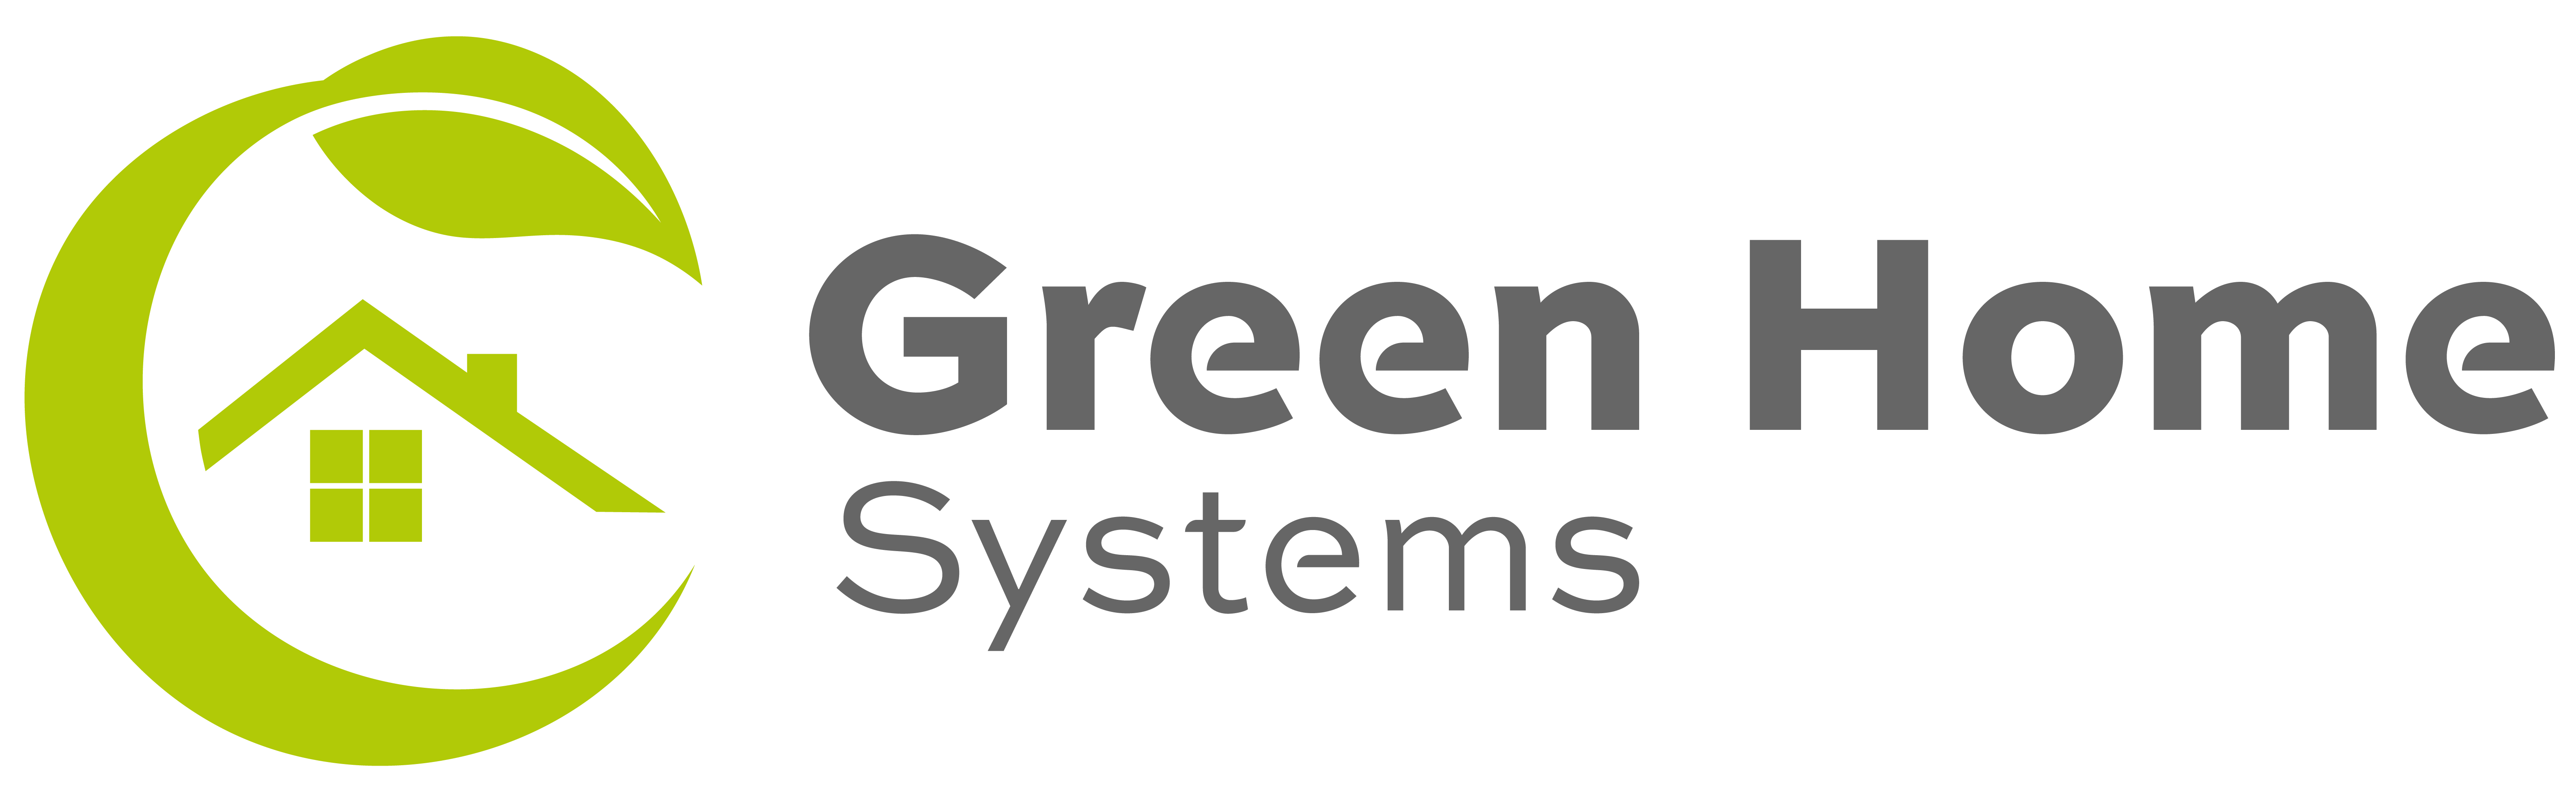 logo for Green Home Systems Limited